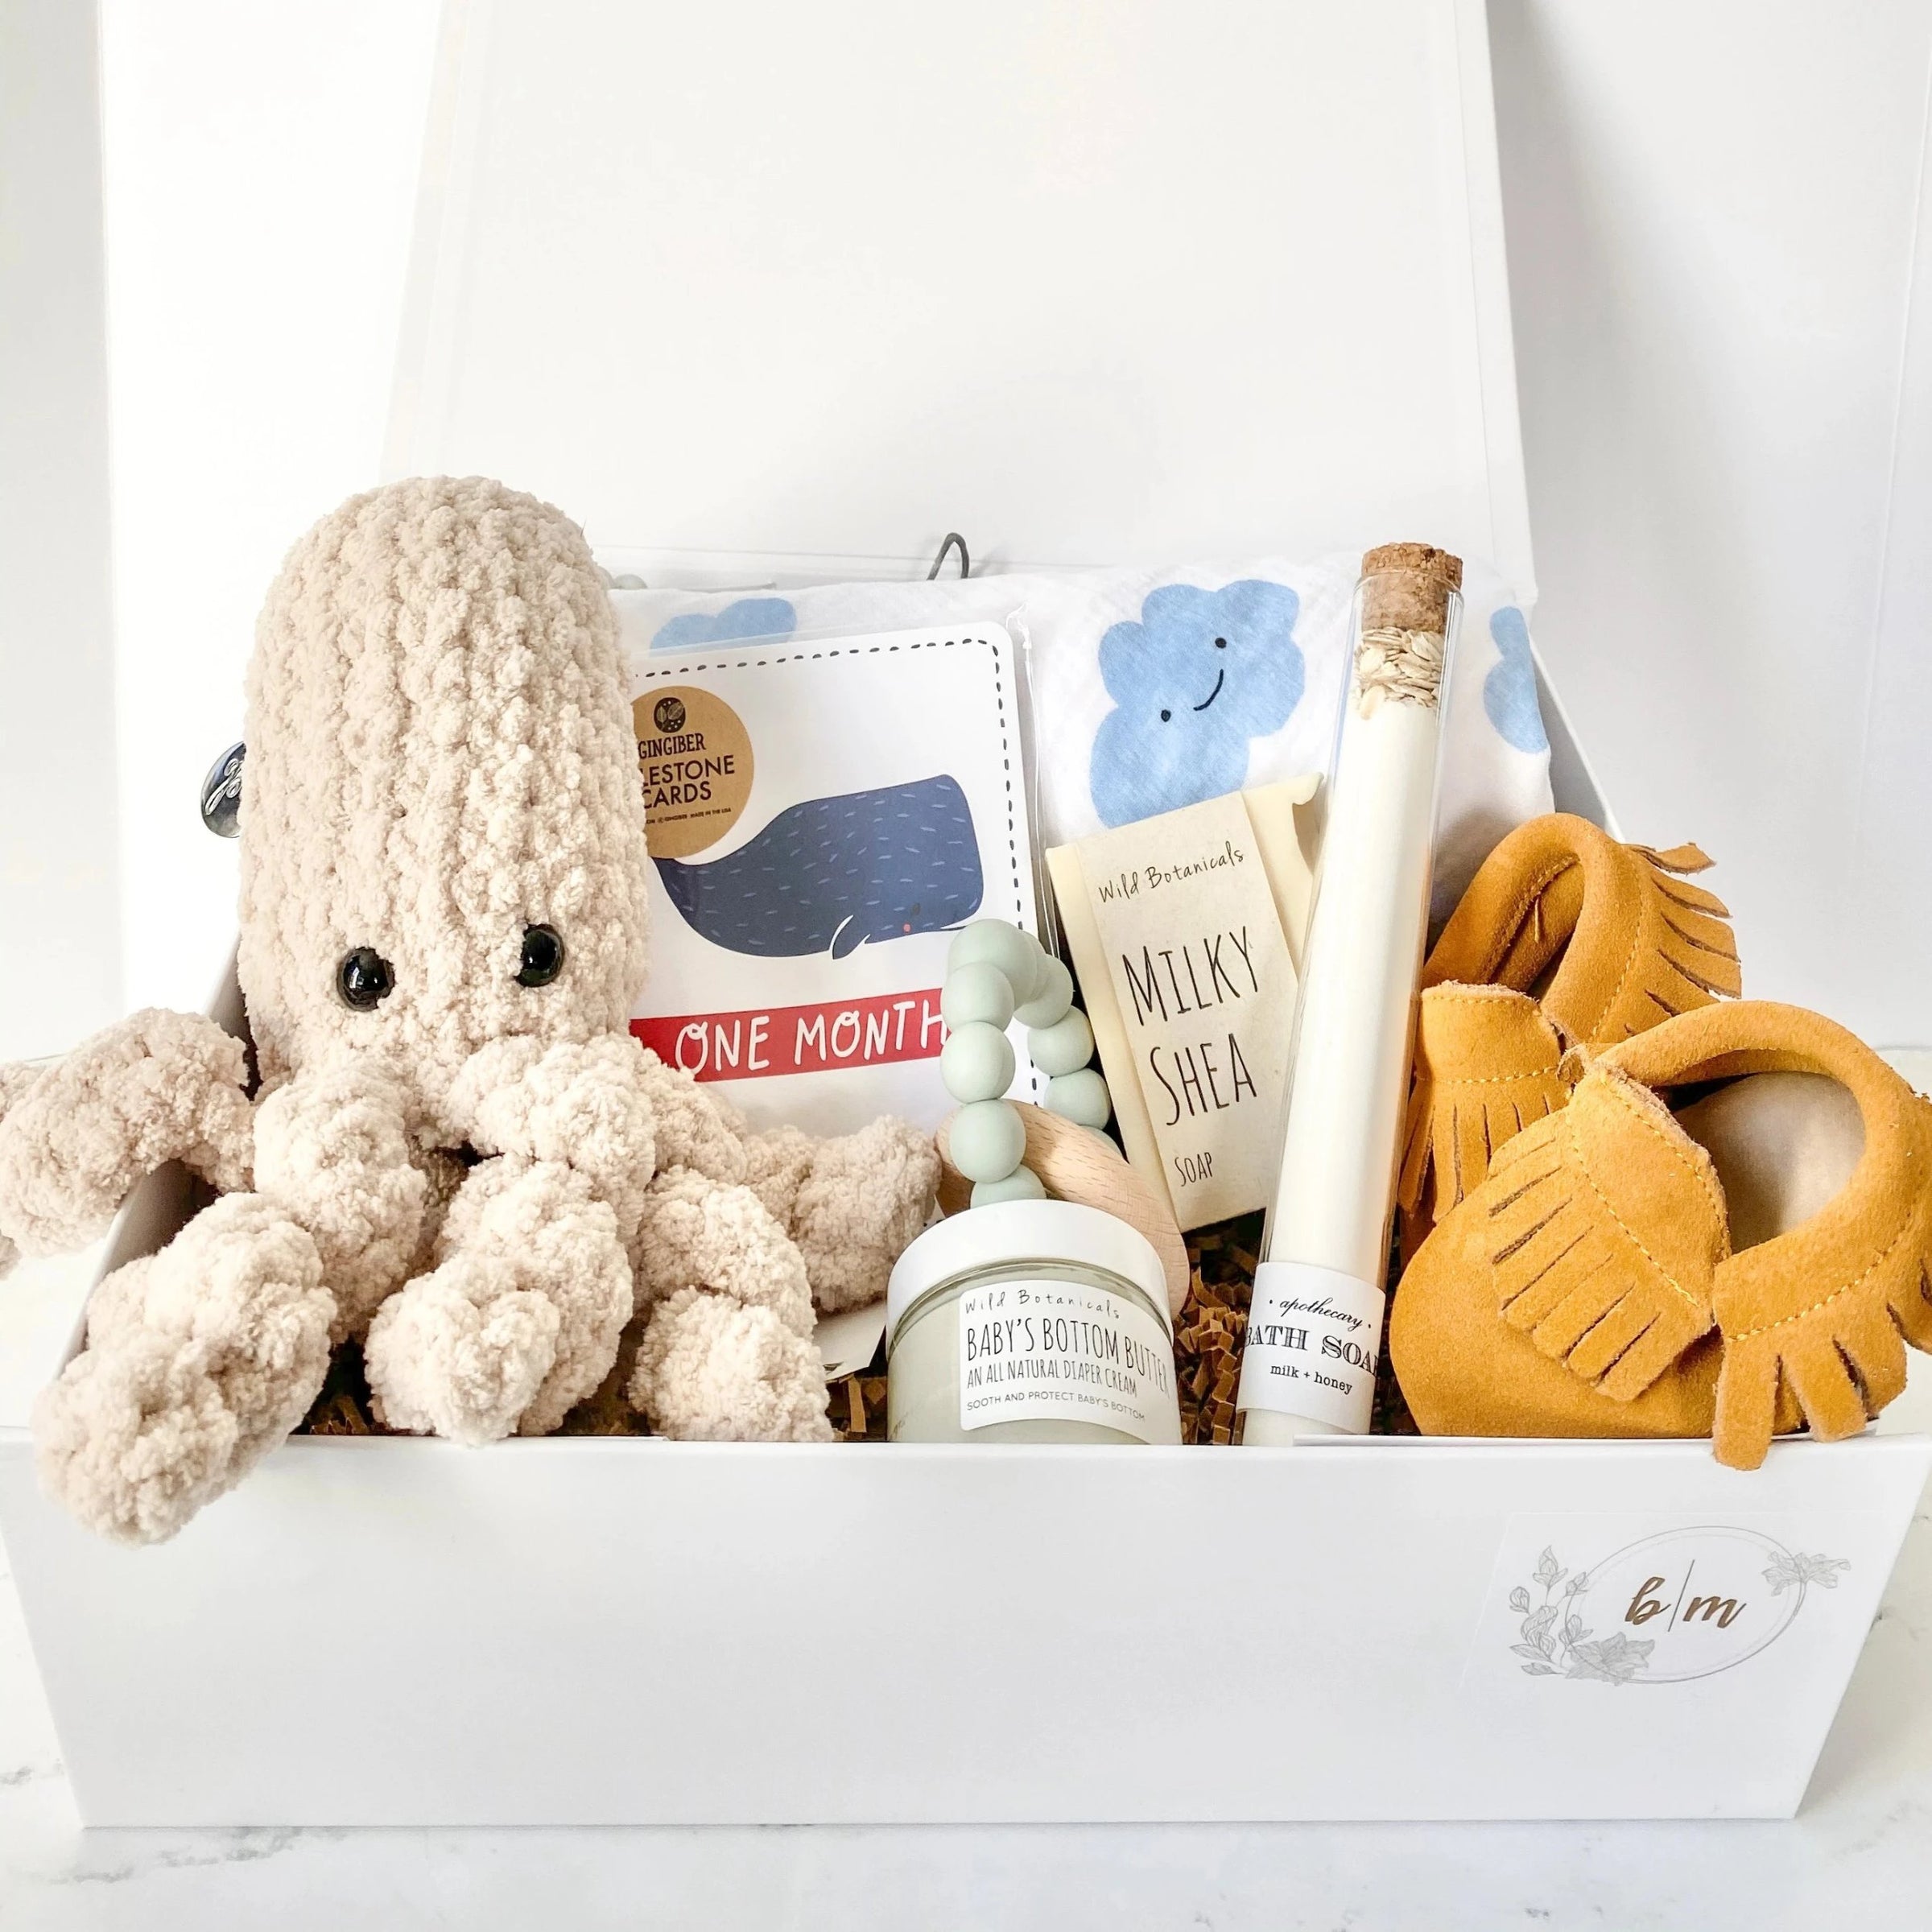 BLUME BABY DELUXE: ANCHORS - Blume Market